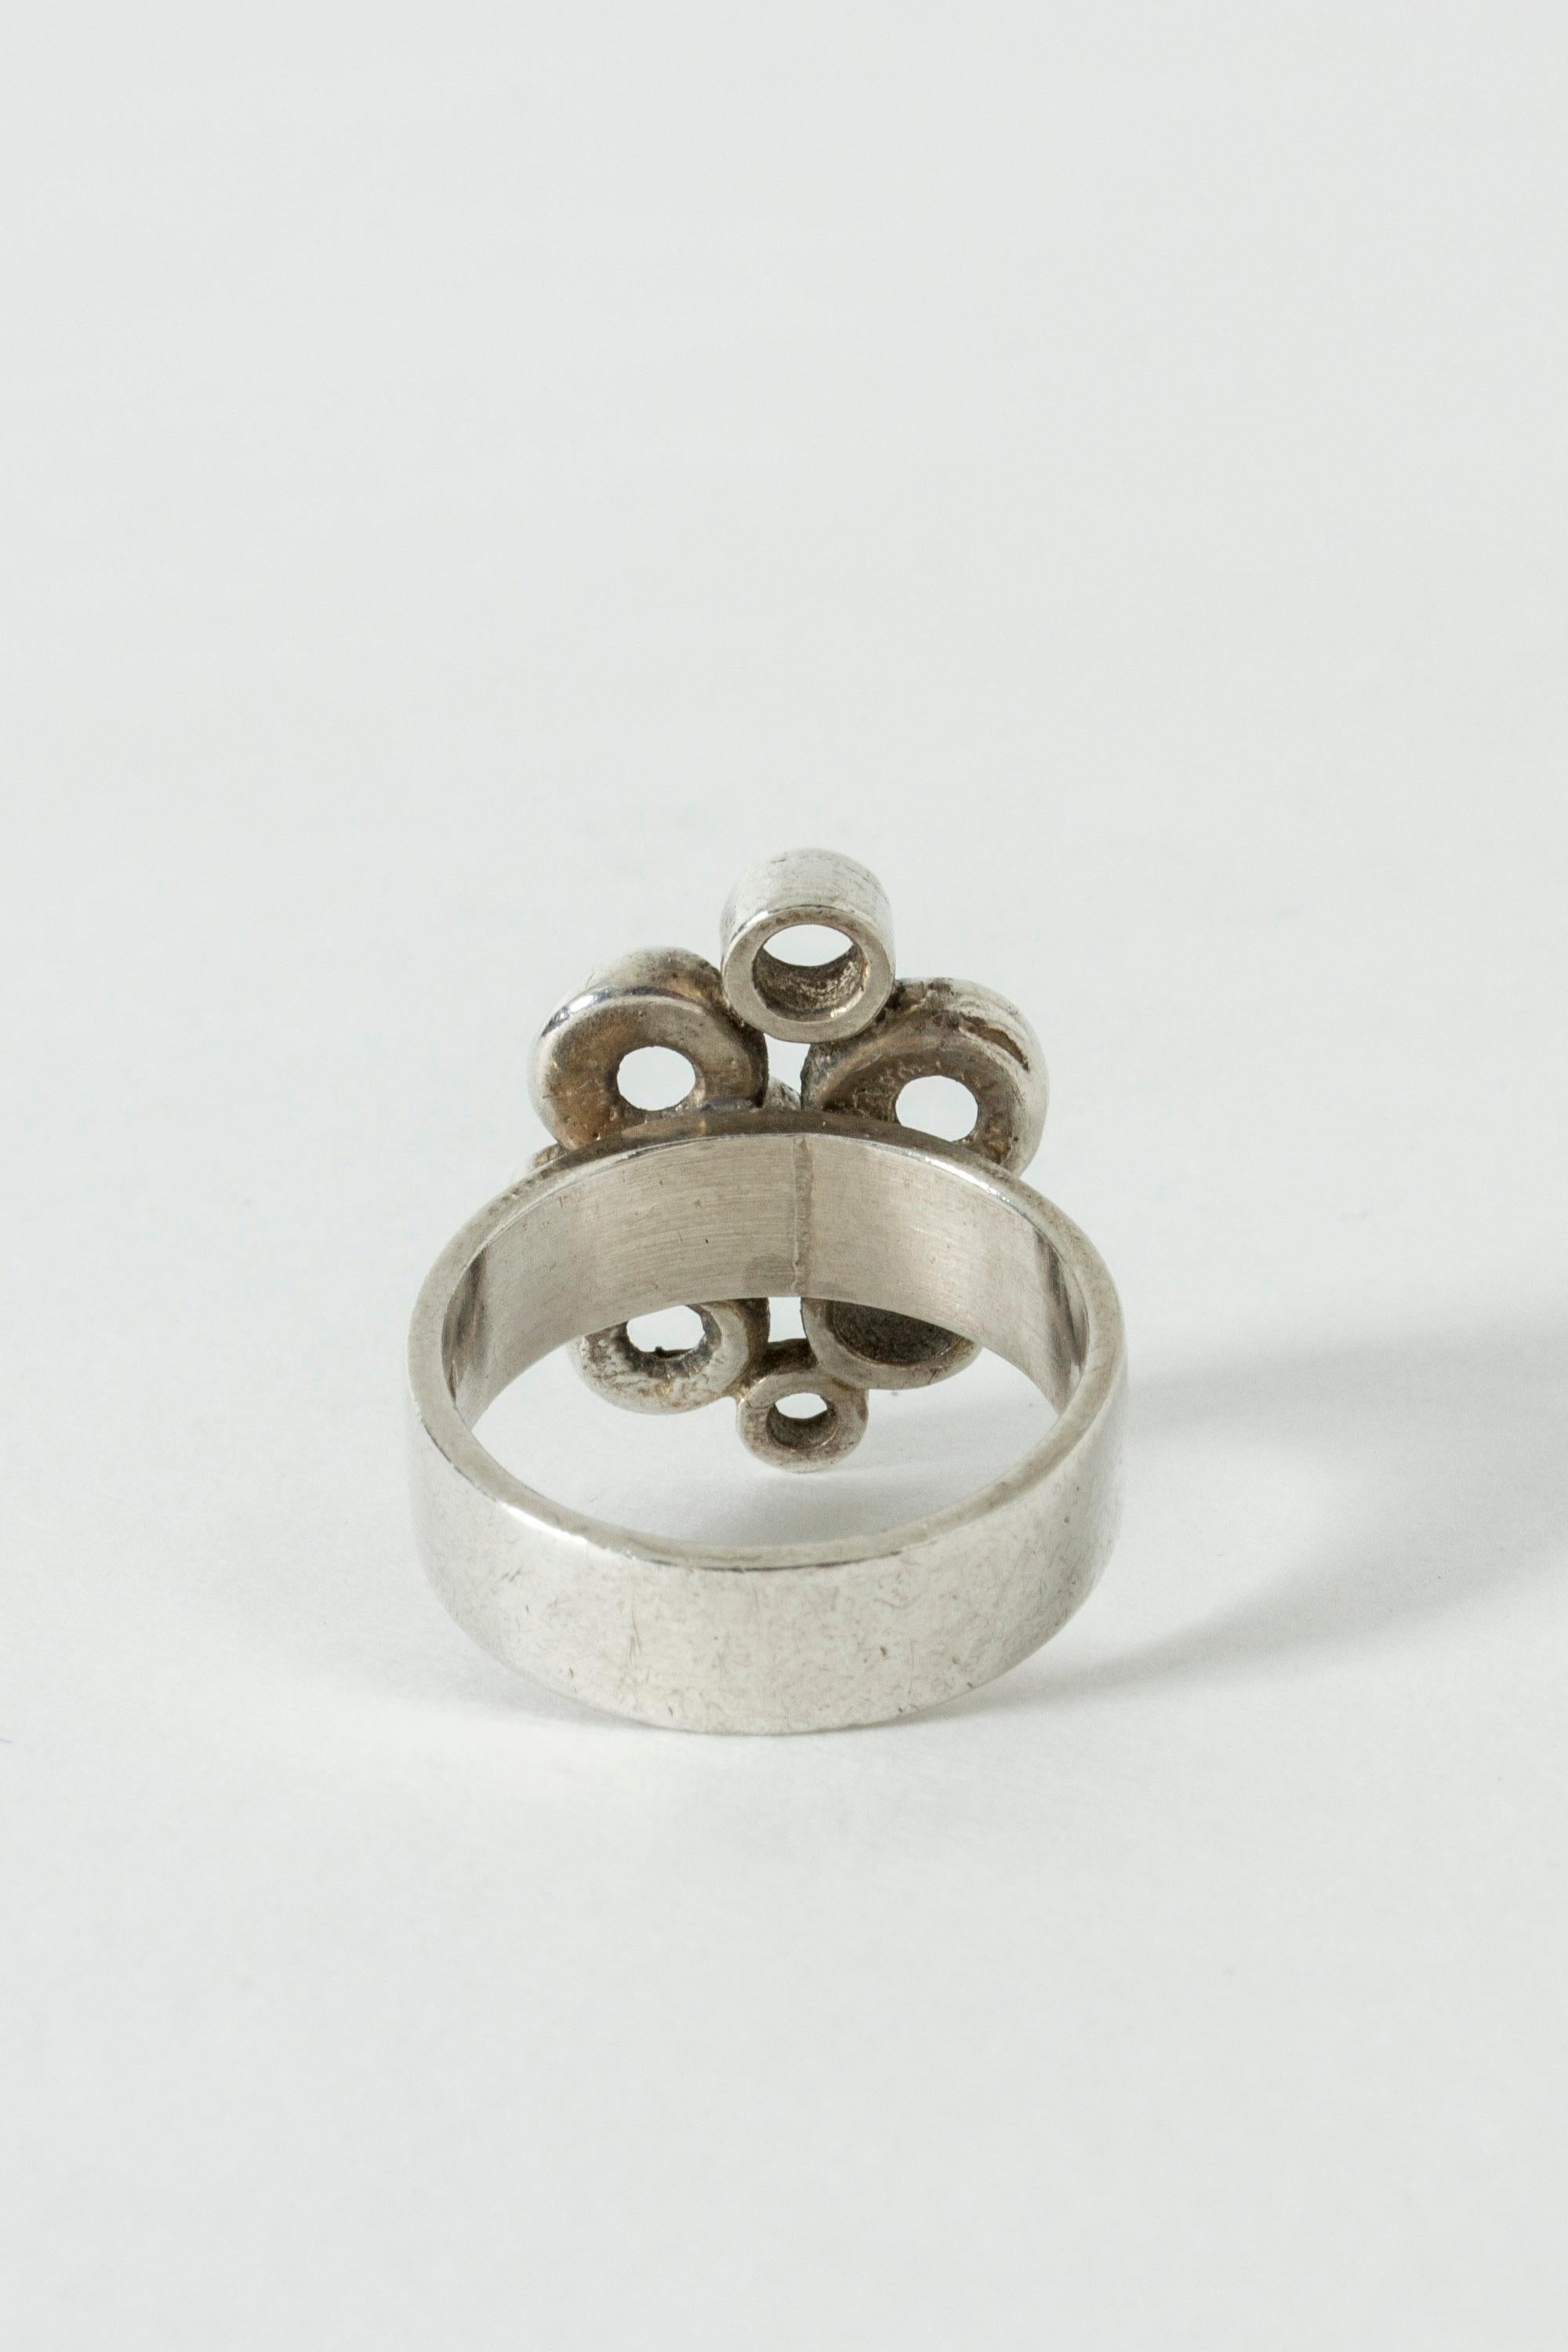 Modernist Silver Ring by Isaac Cohen, Sweden, 1967